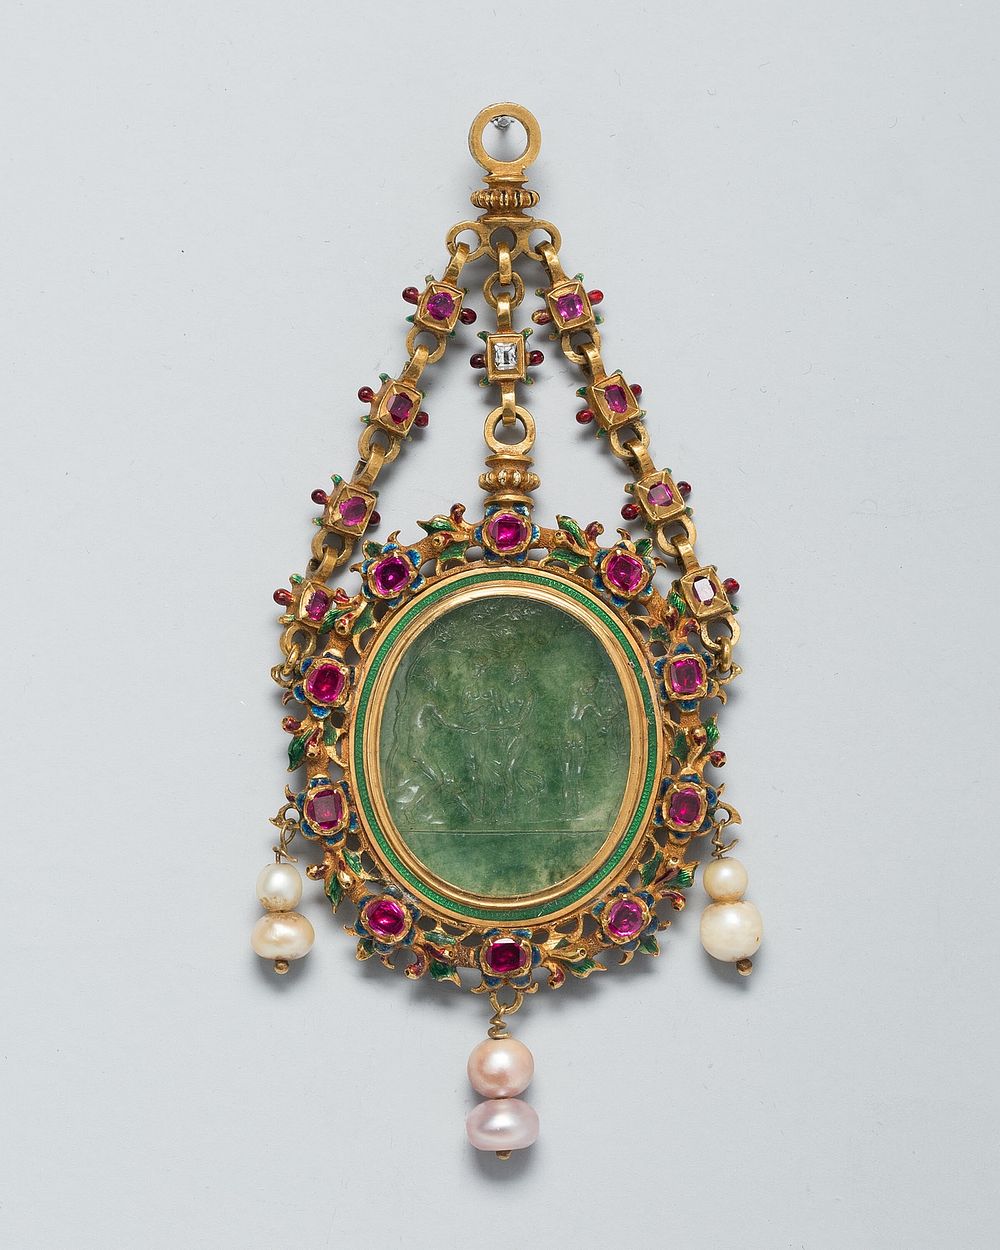 Pendant with an Intaglio of the Judgment of Paris